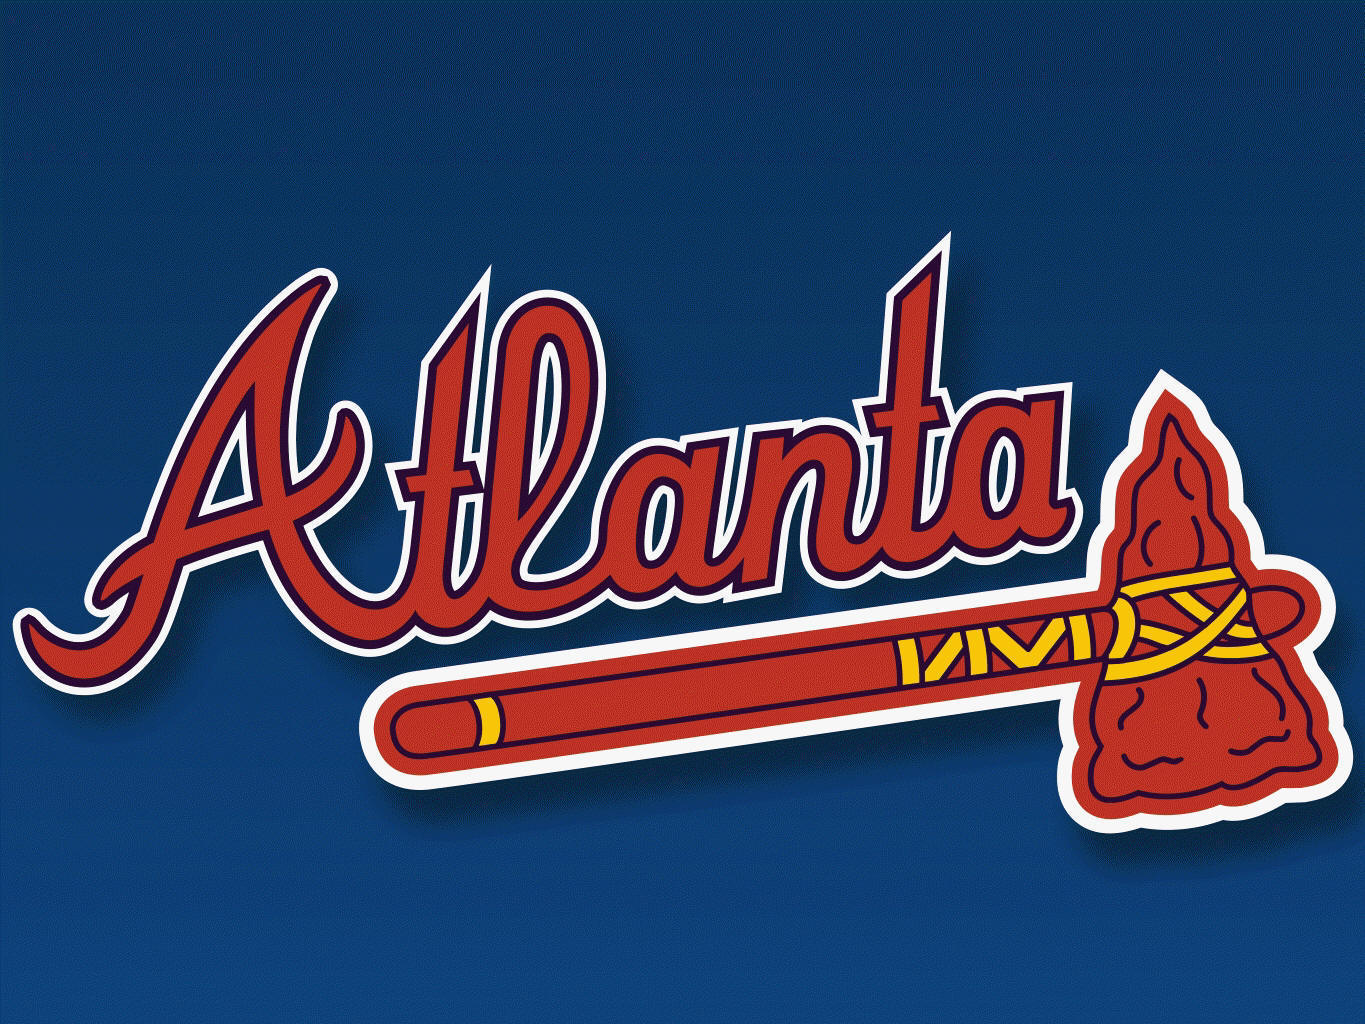 WILL THE BRAVES RISE FROM MEDIOCRITY????